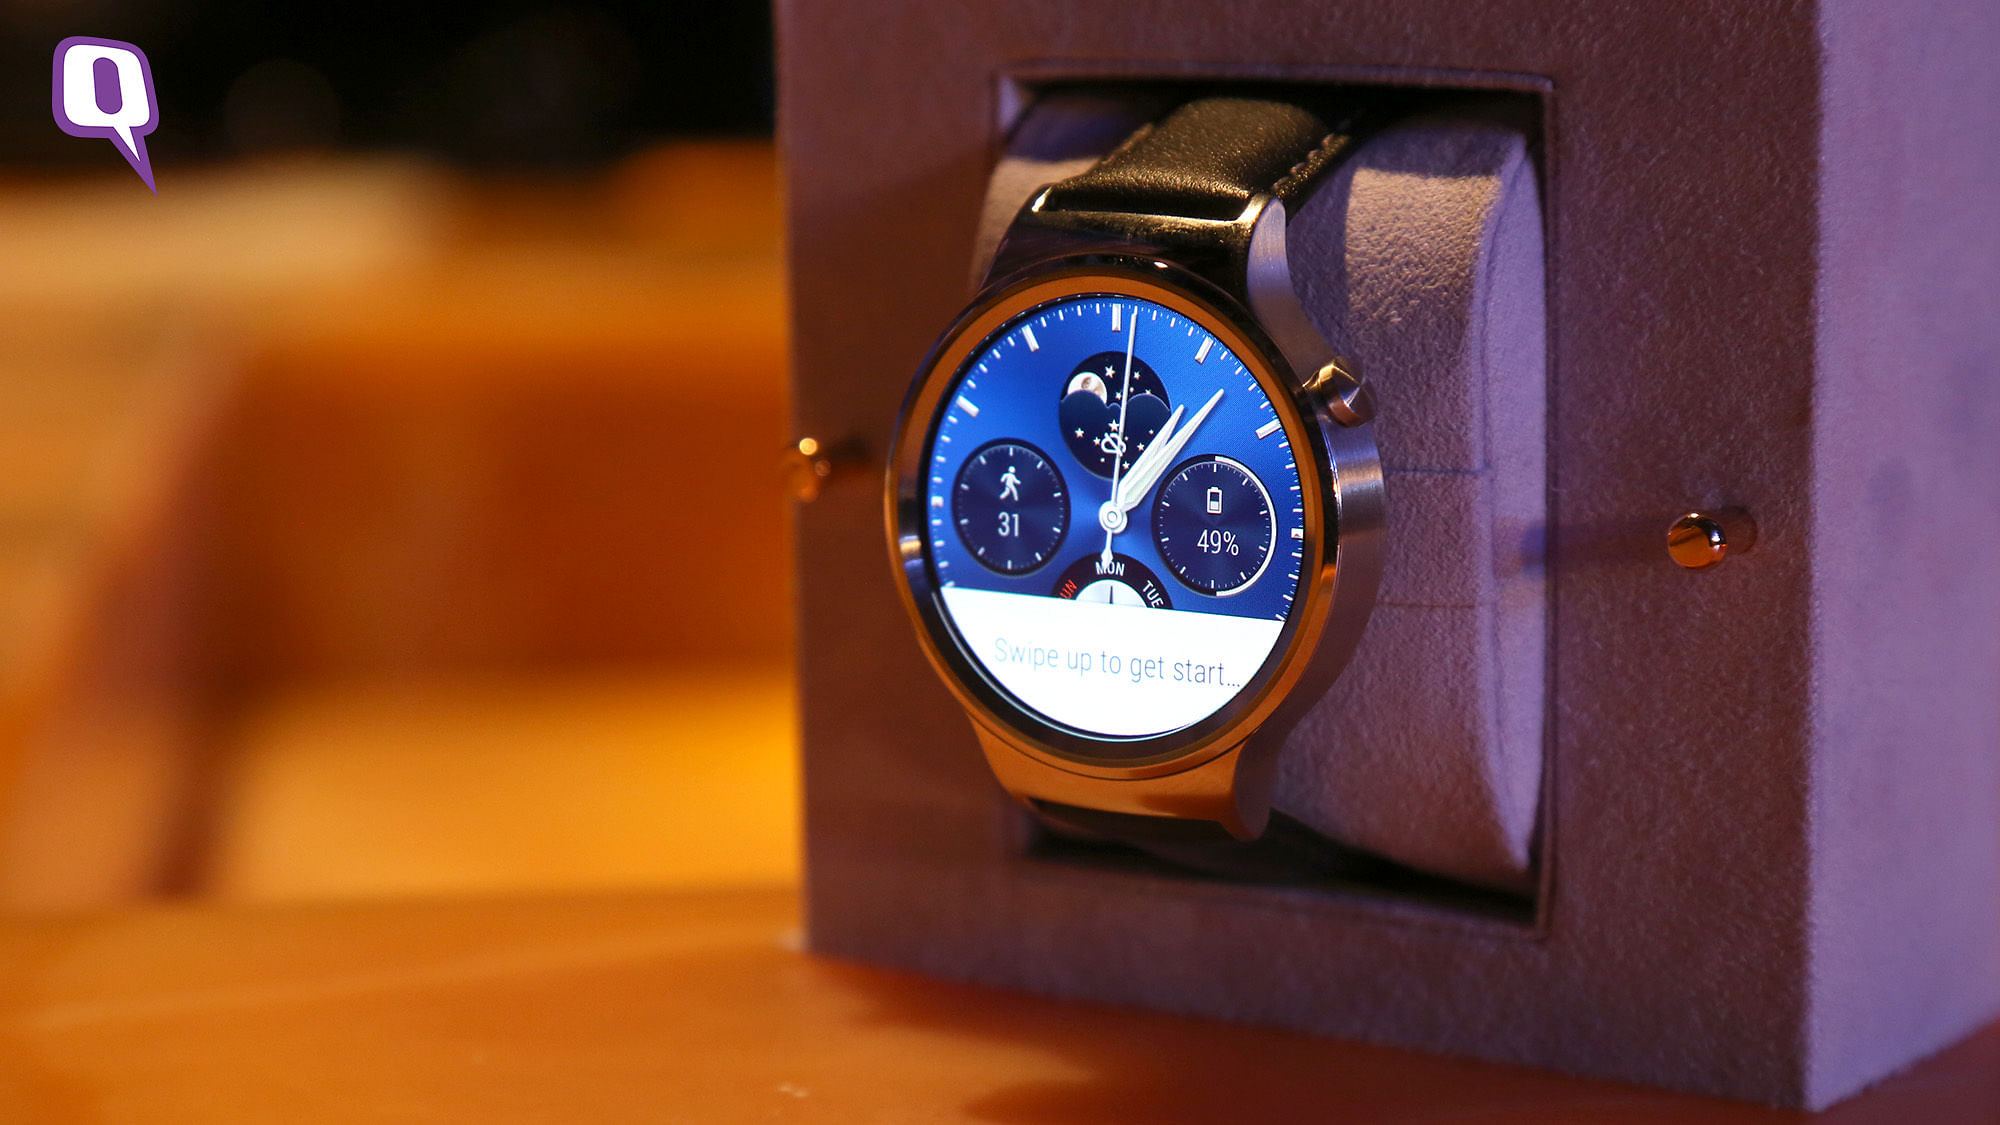 Huawei Watch is the Android Wear watch priced at Rs 22,900. (Photo: <b>The Quint</b>)